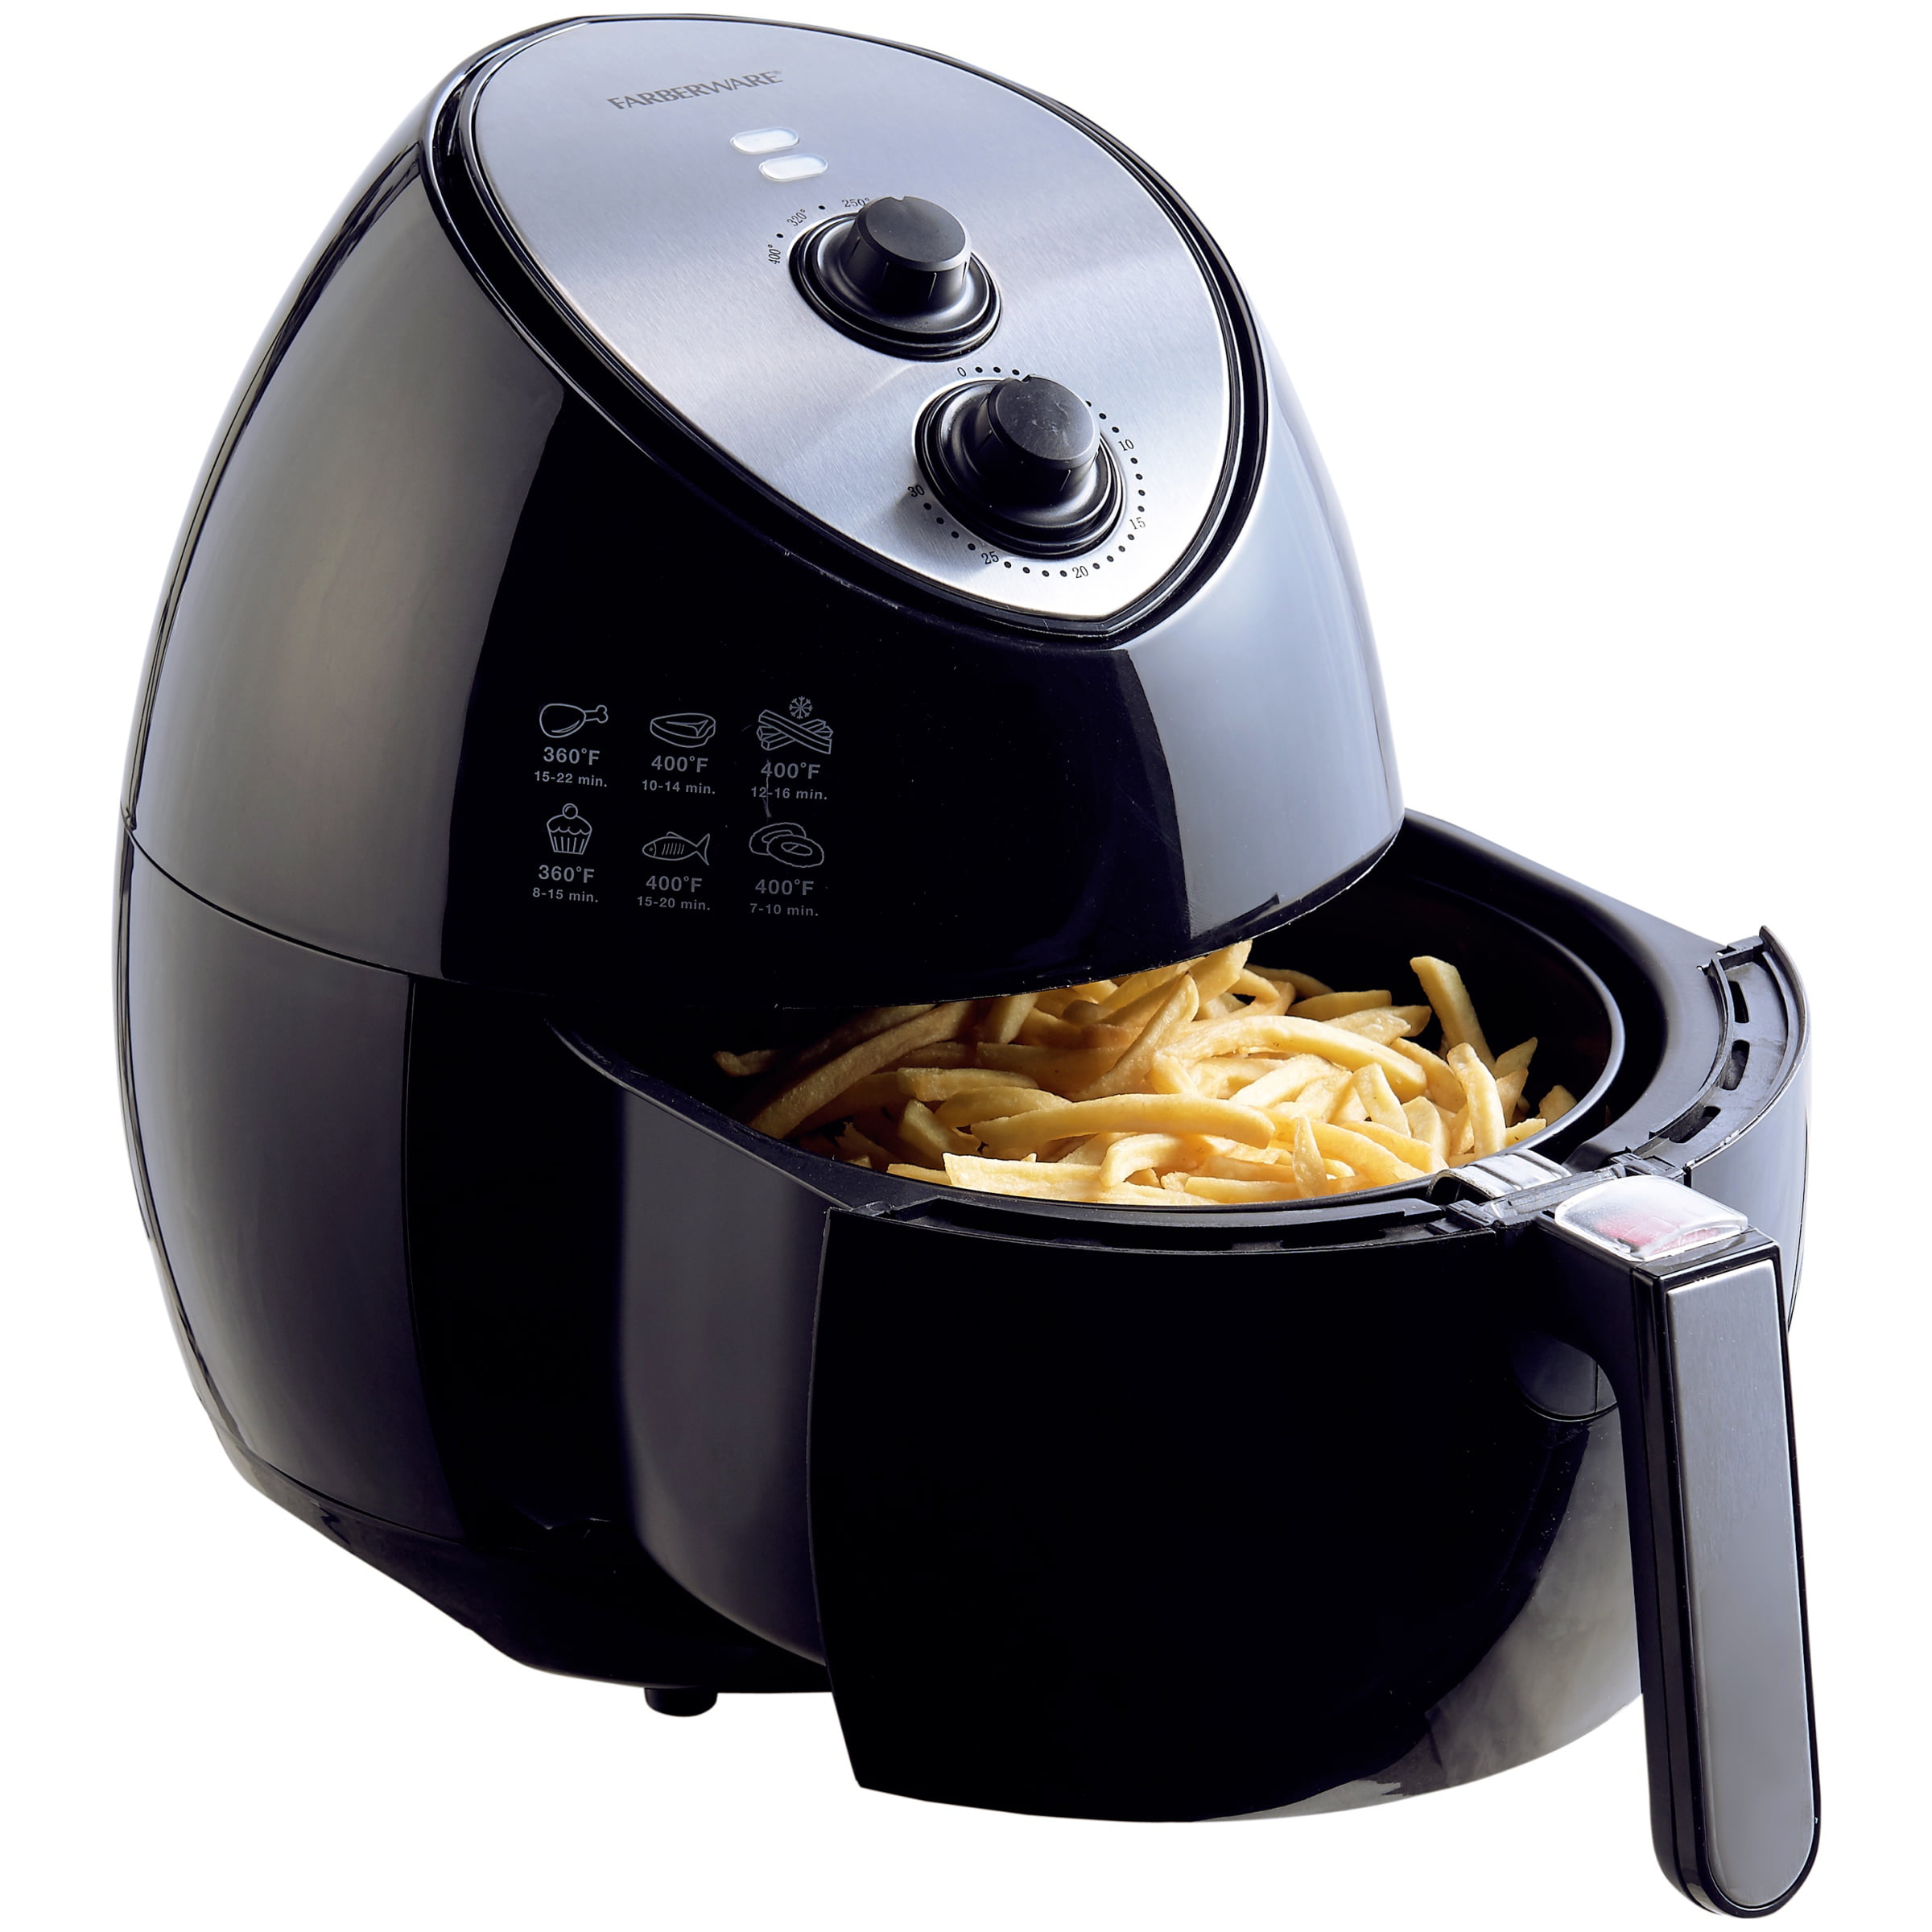 Duronic AF34 Air Fryer without Oil 2400W, 2 Baskets of 5L + 1 Basket of  10L, Transparent Windows and Built-in Lights, 10 Predefined Programs, Sync Cook Finish Function